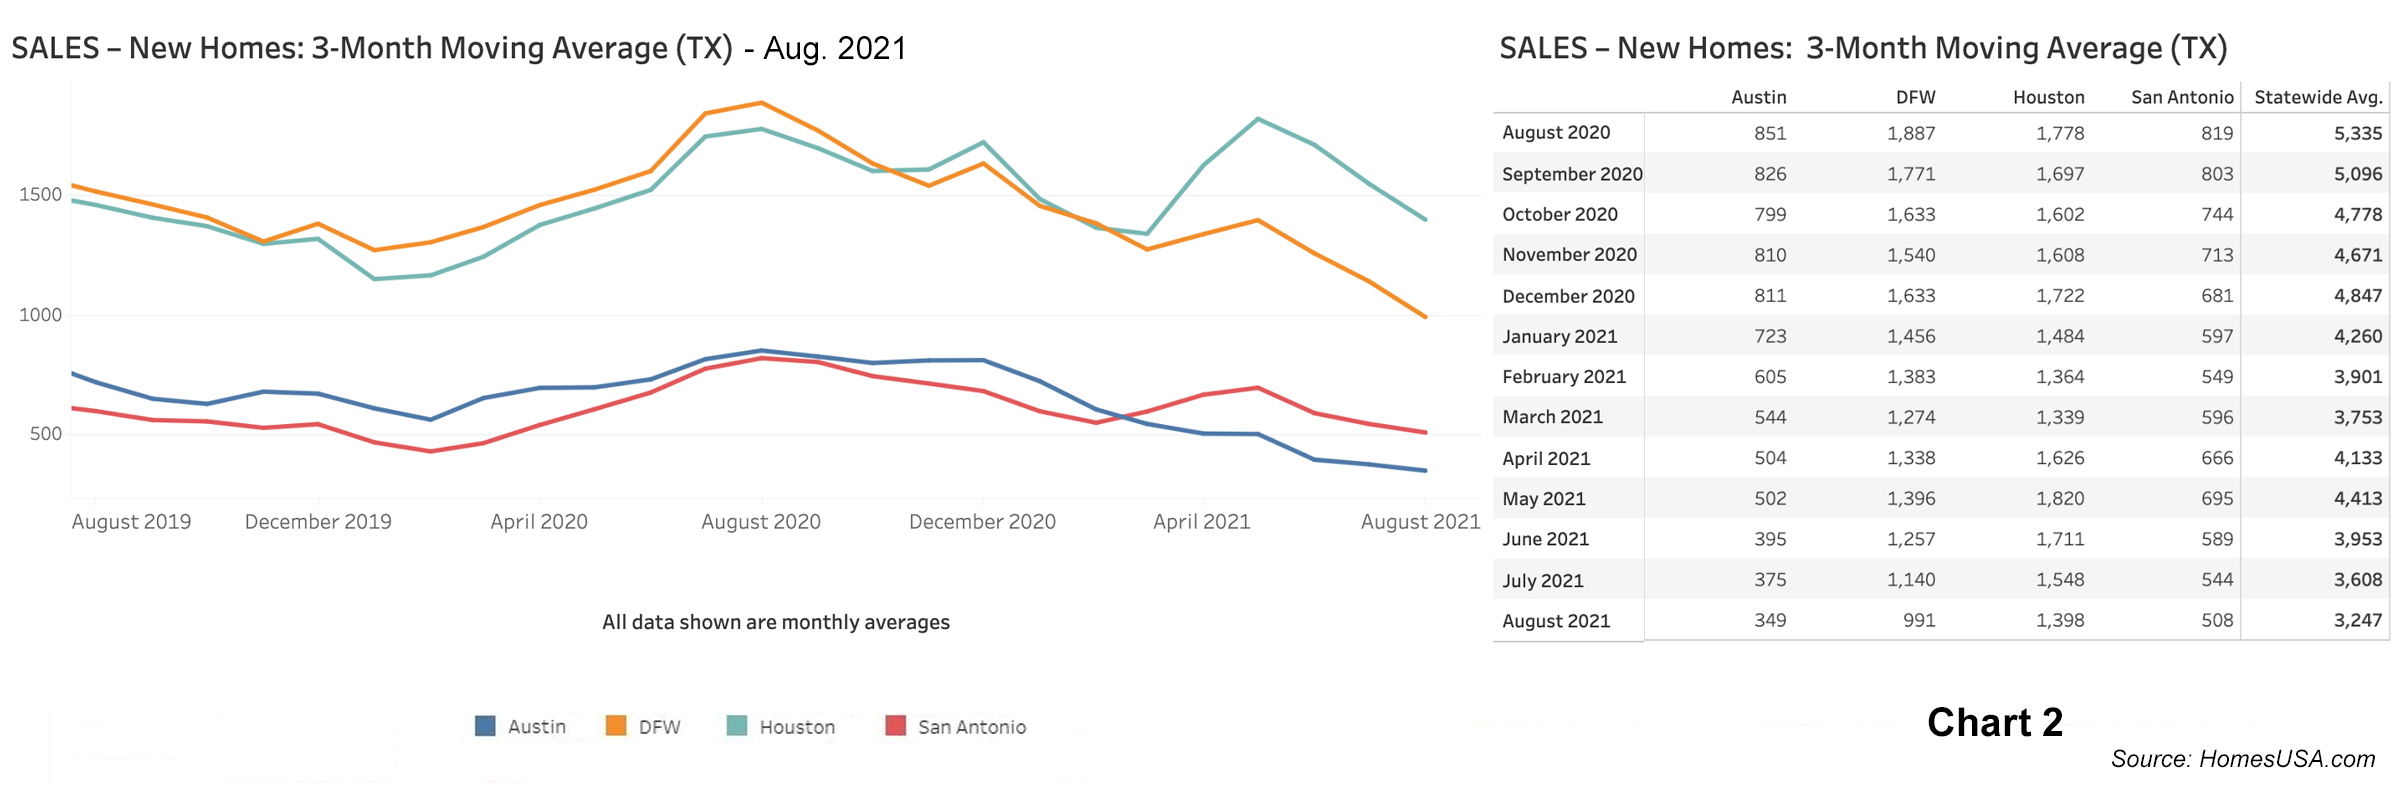 Chart 2: Texas New Home Sales - August 2021